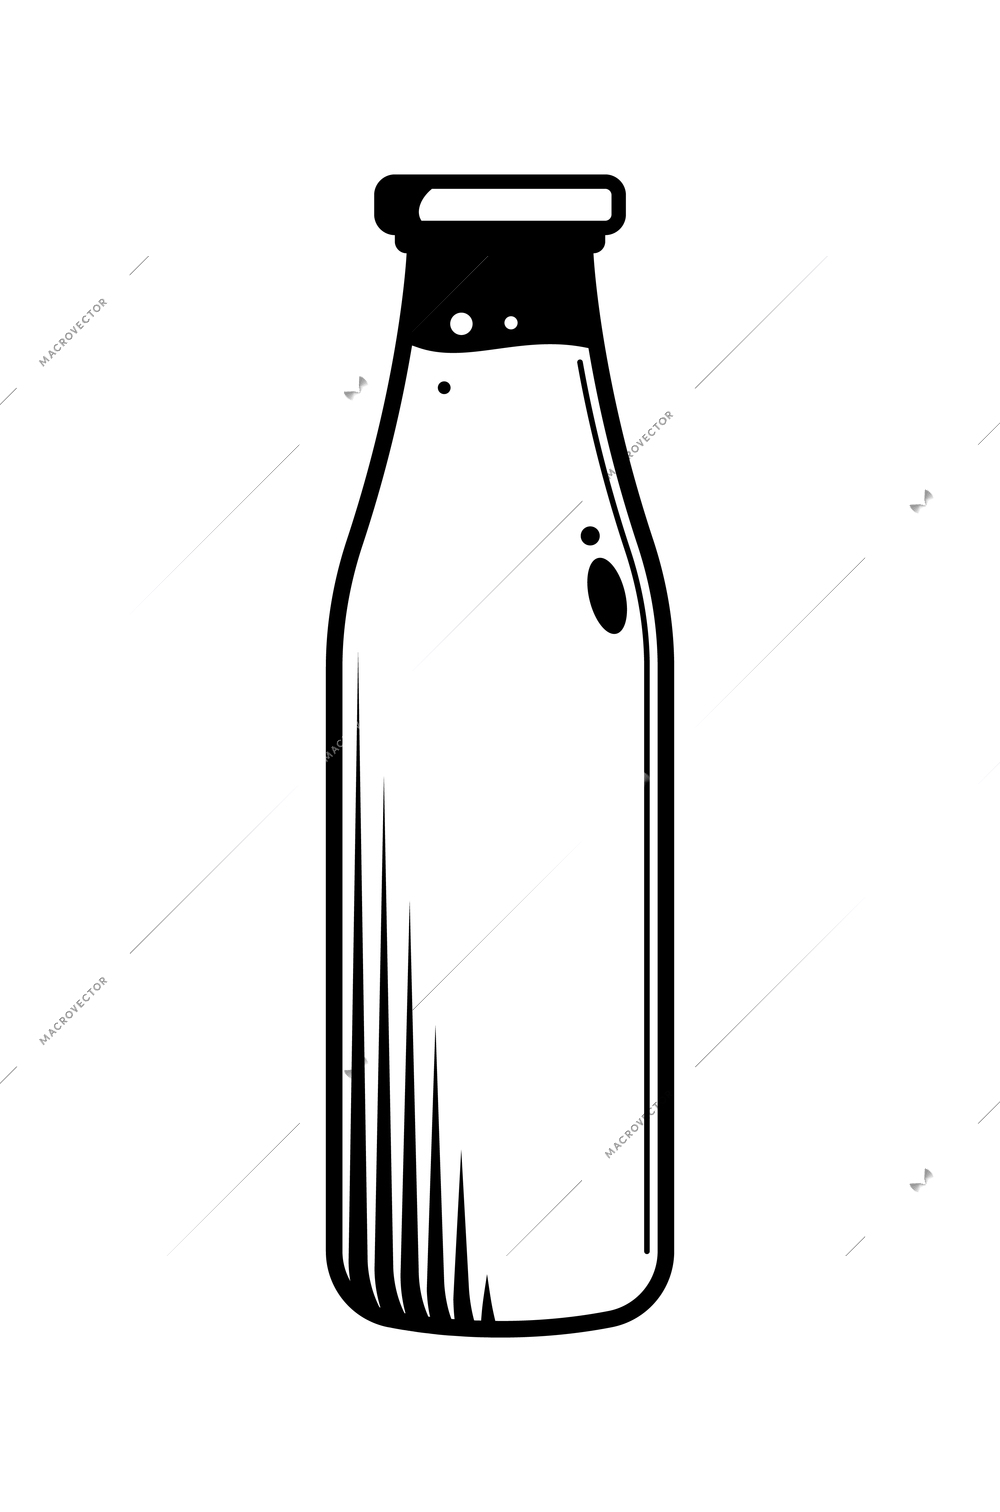 Milk farm engraving hand drawn composition with isolated monochrome image of bottle with milk vector illustration